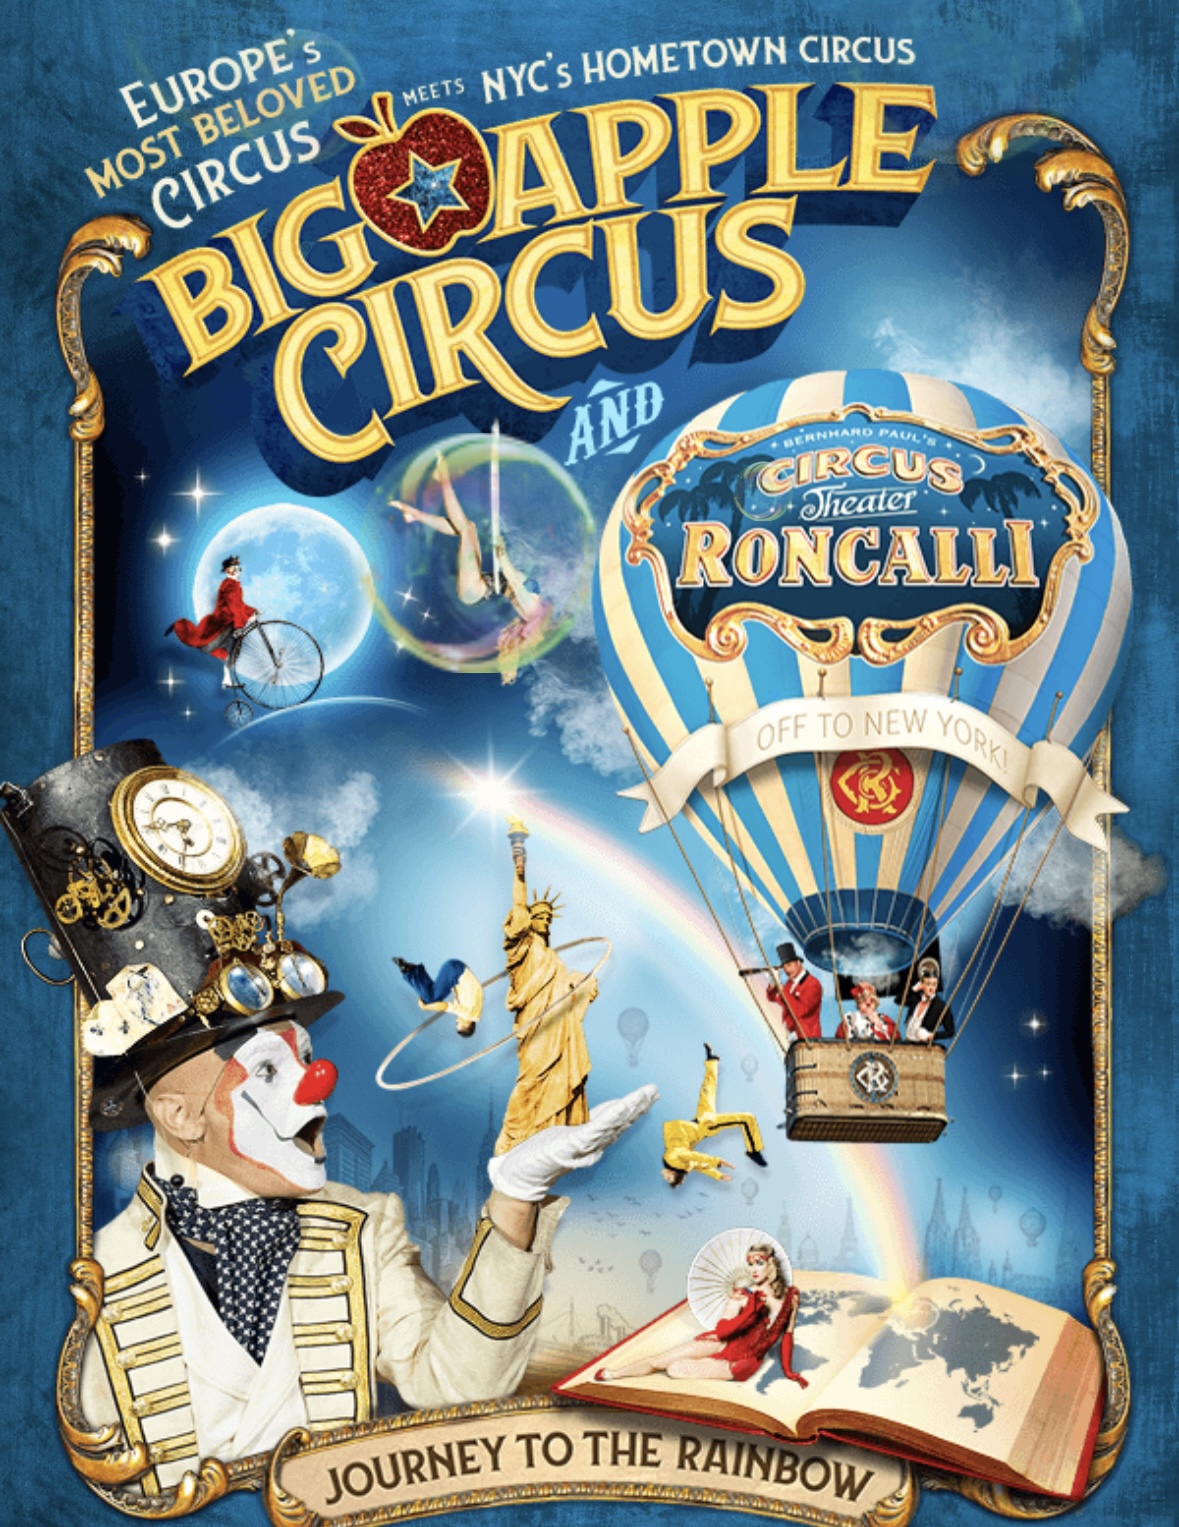 The Celebrated Big Apple Circus: “Journey to the Rainbow” Arrives November 8, 2023